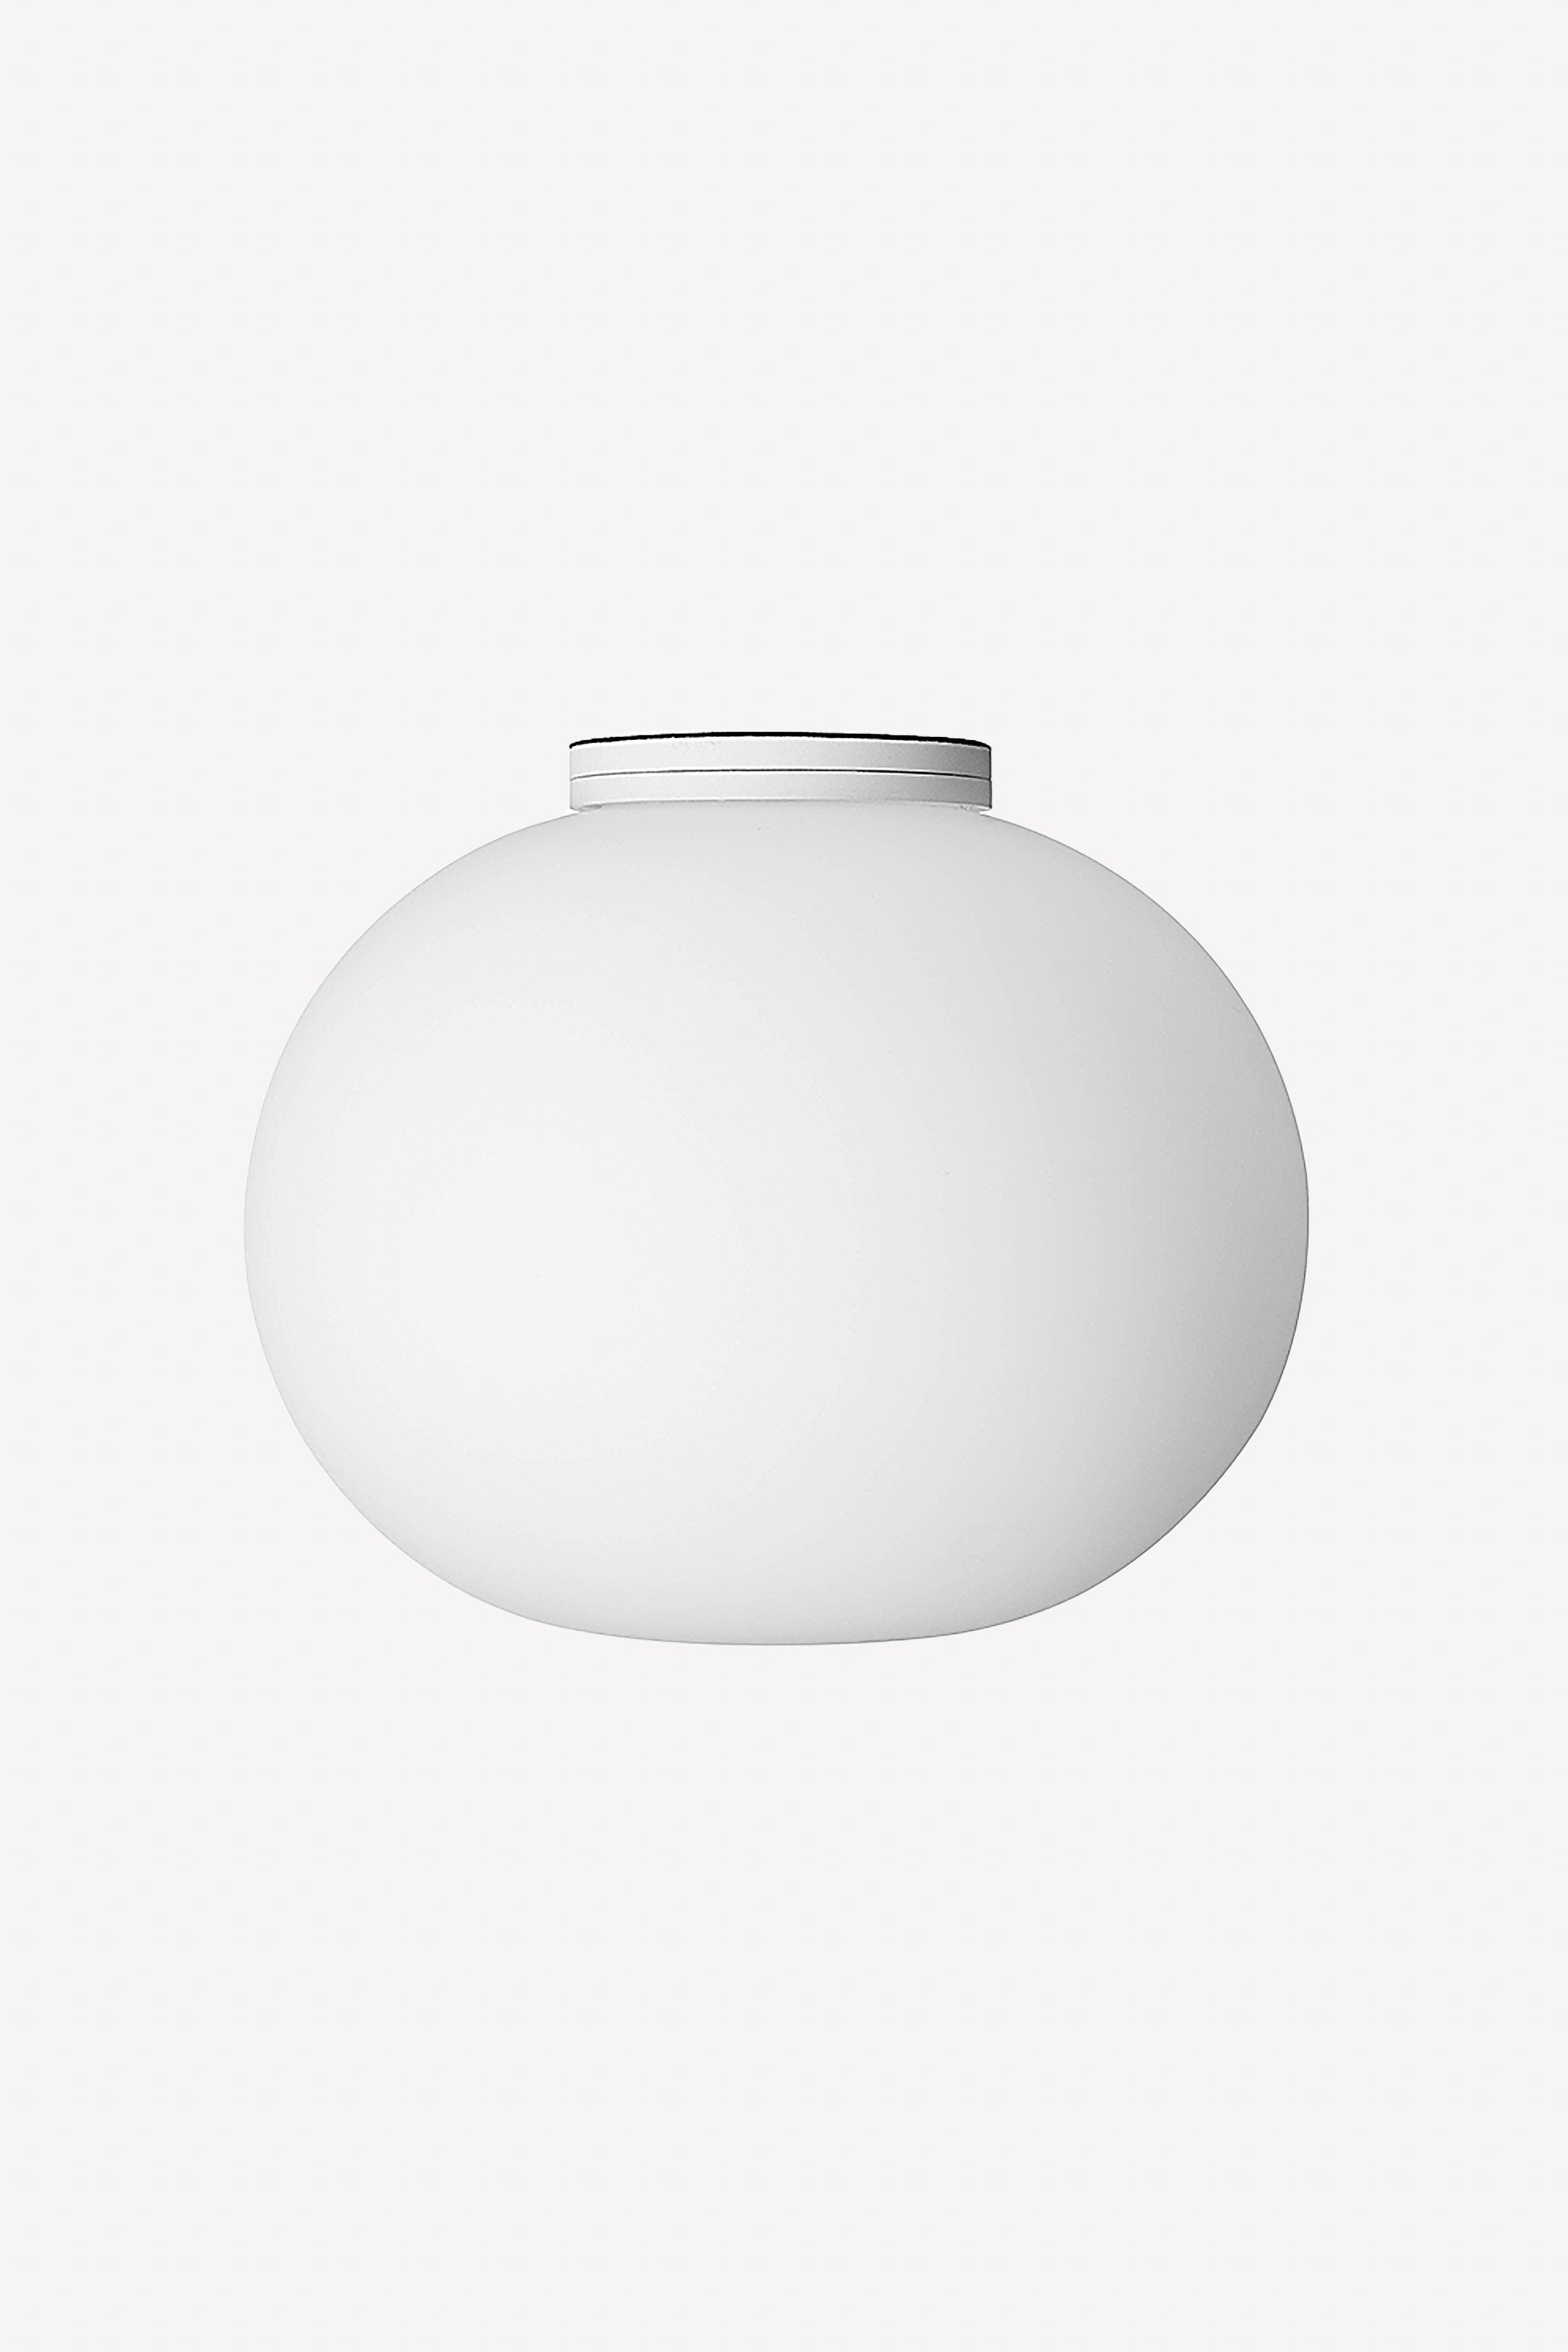 At håndtere snack føderation Glo-Ball - Wall Lights – Hygge Life